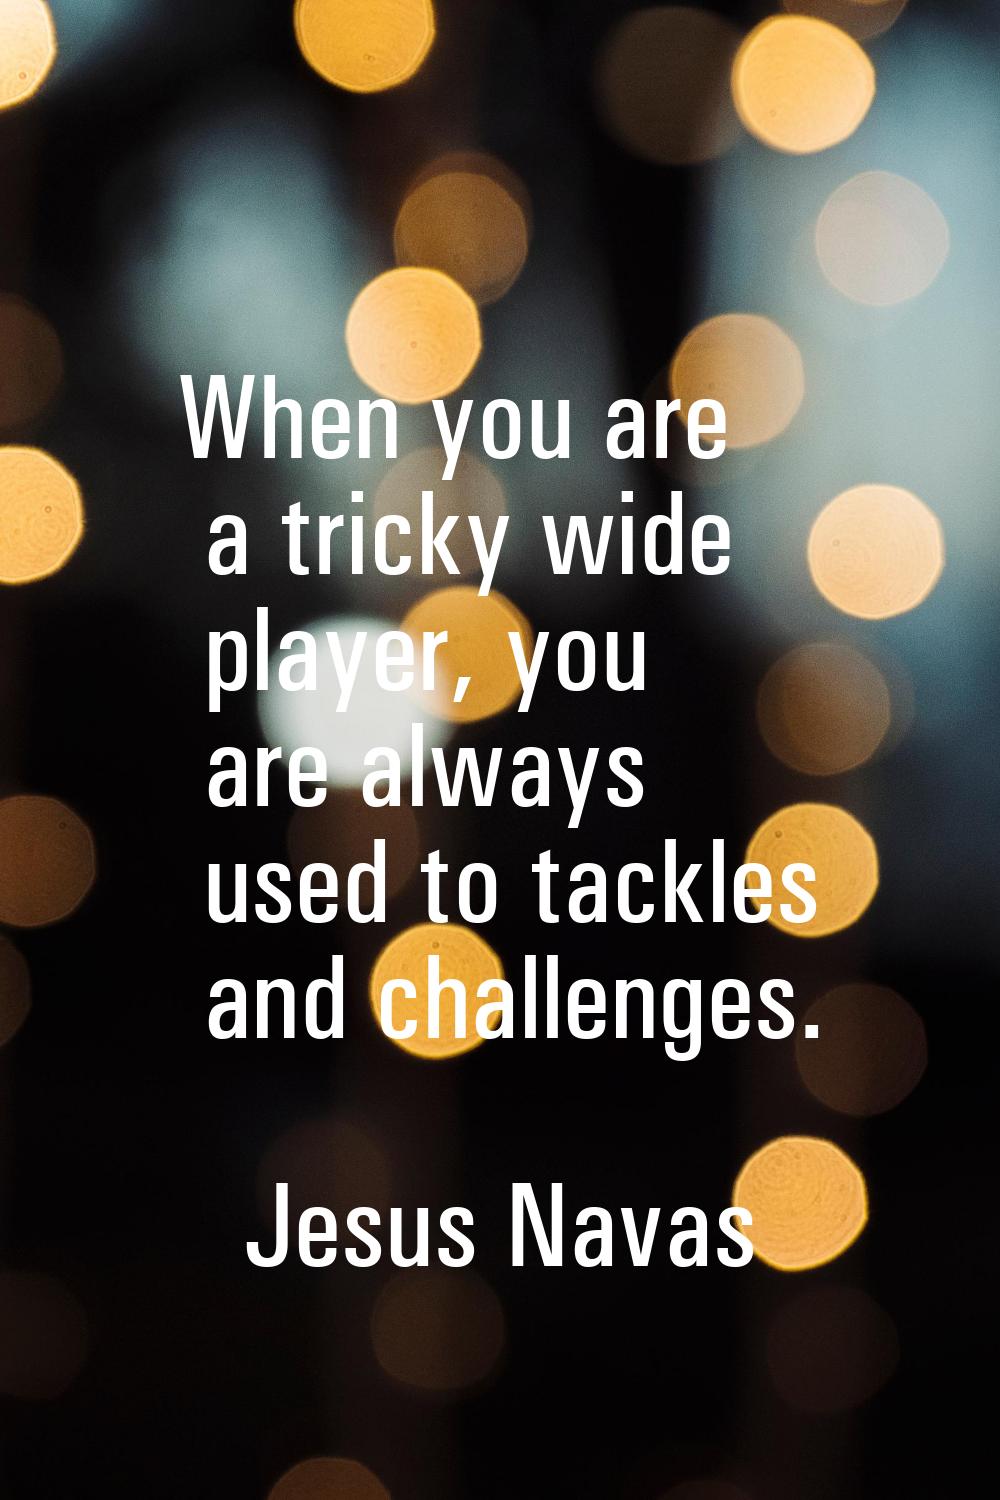 When you are a tricky wide player, you are always used to tackles and challenges.